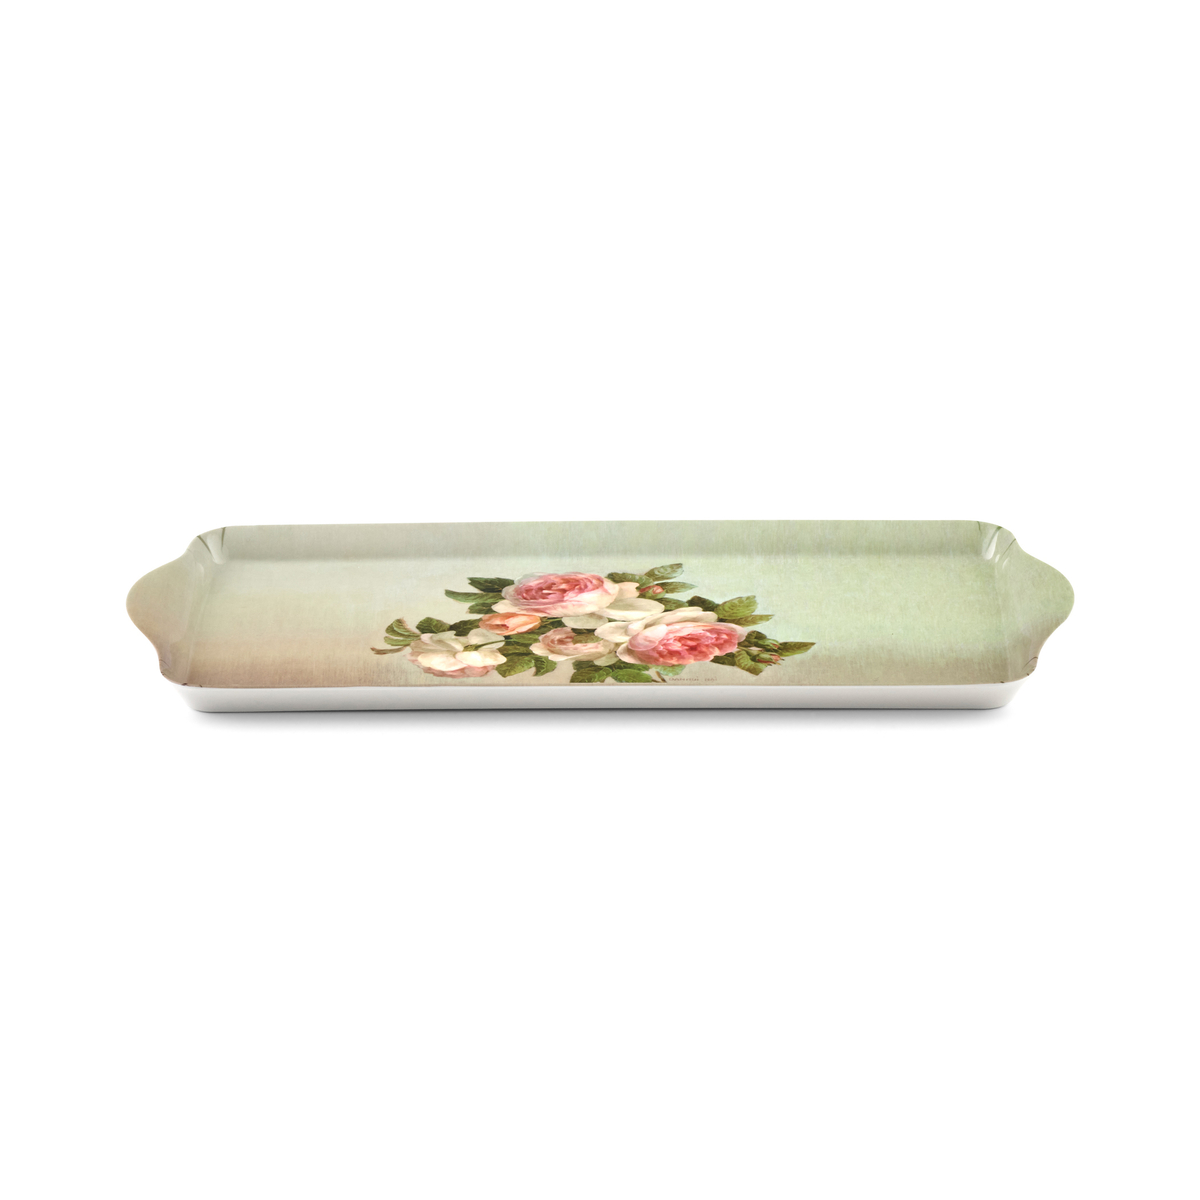 Pimpernel Antique Roses Sandwich Tray image number null